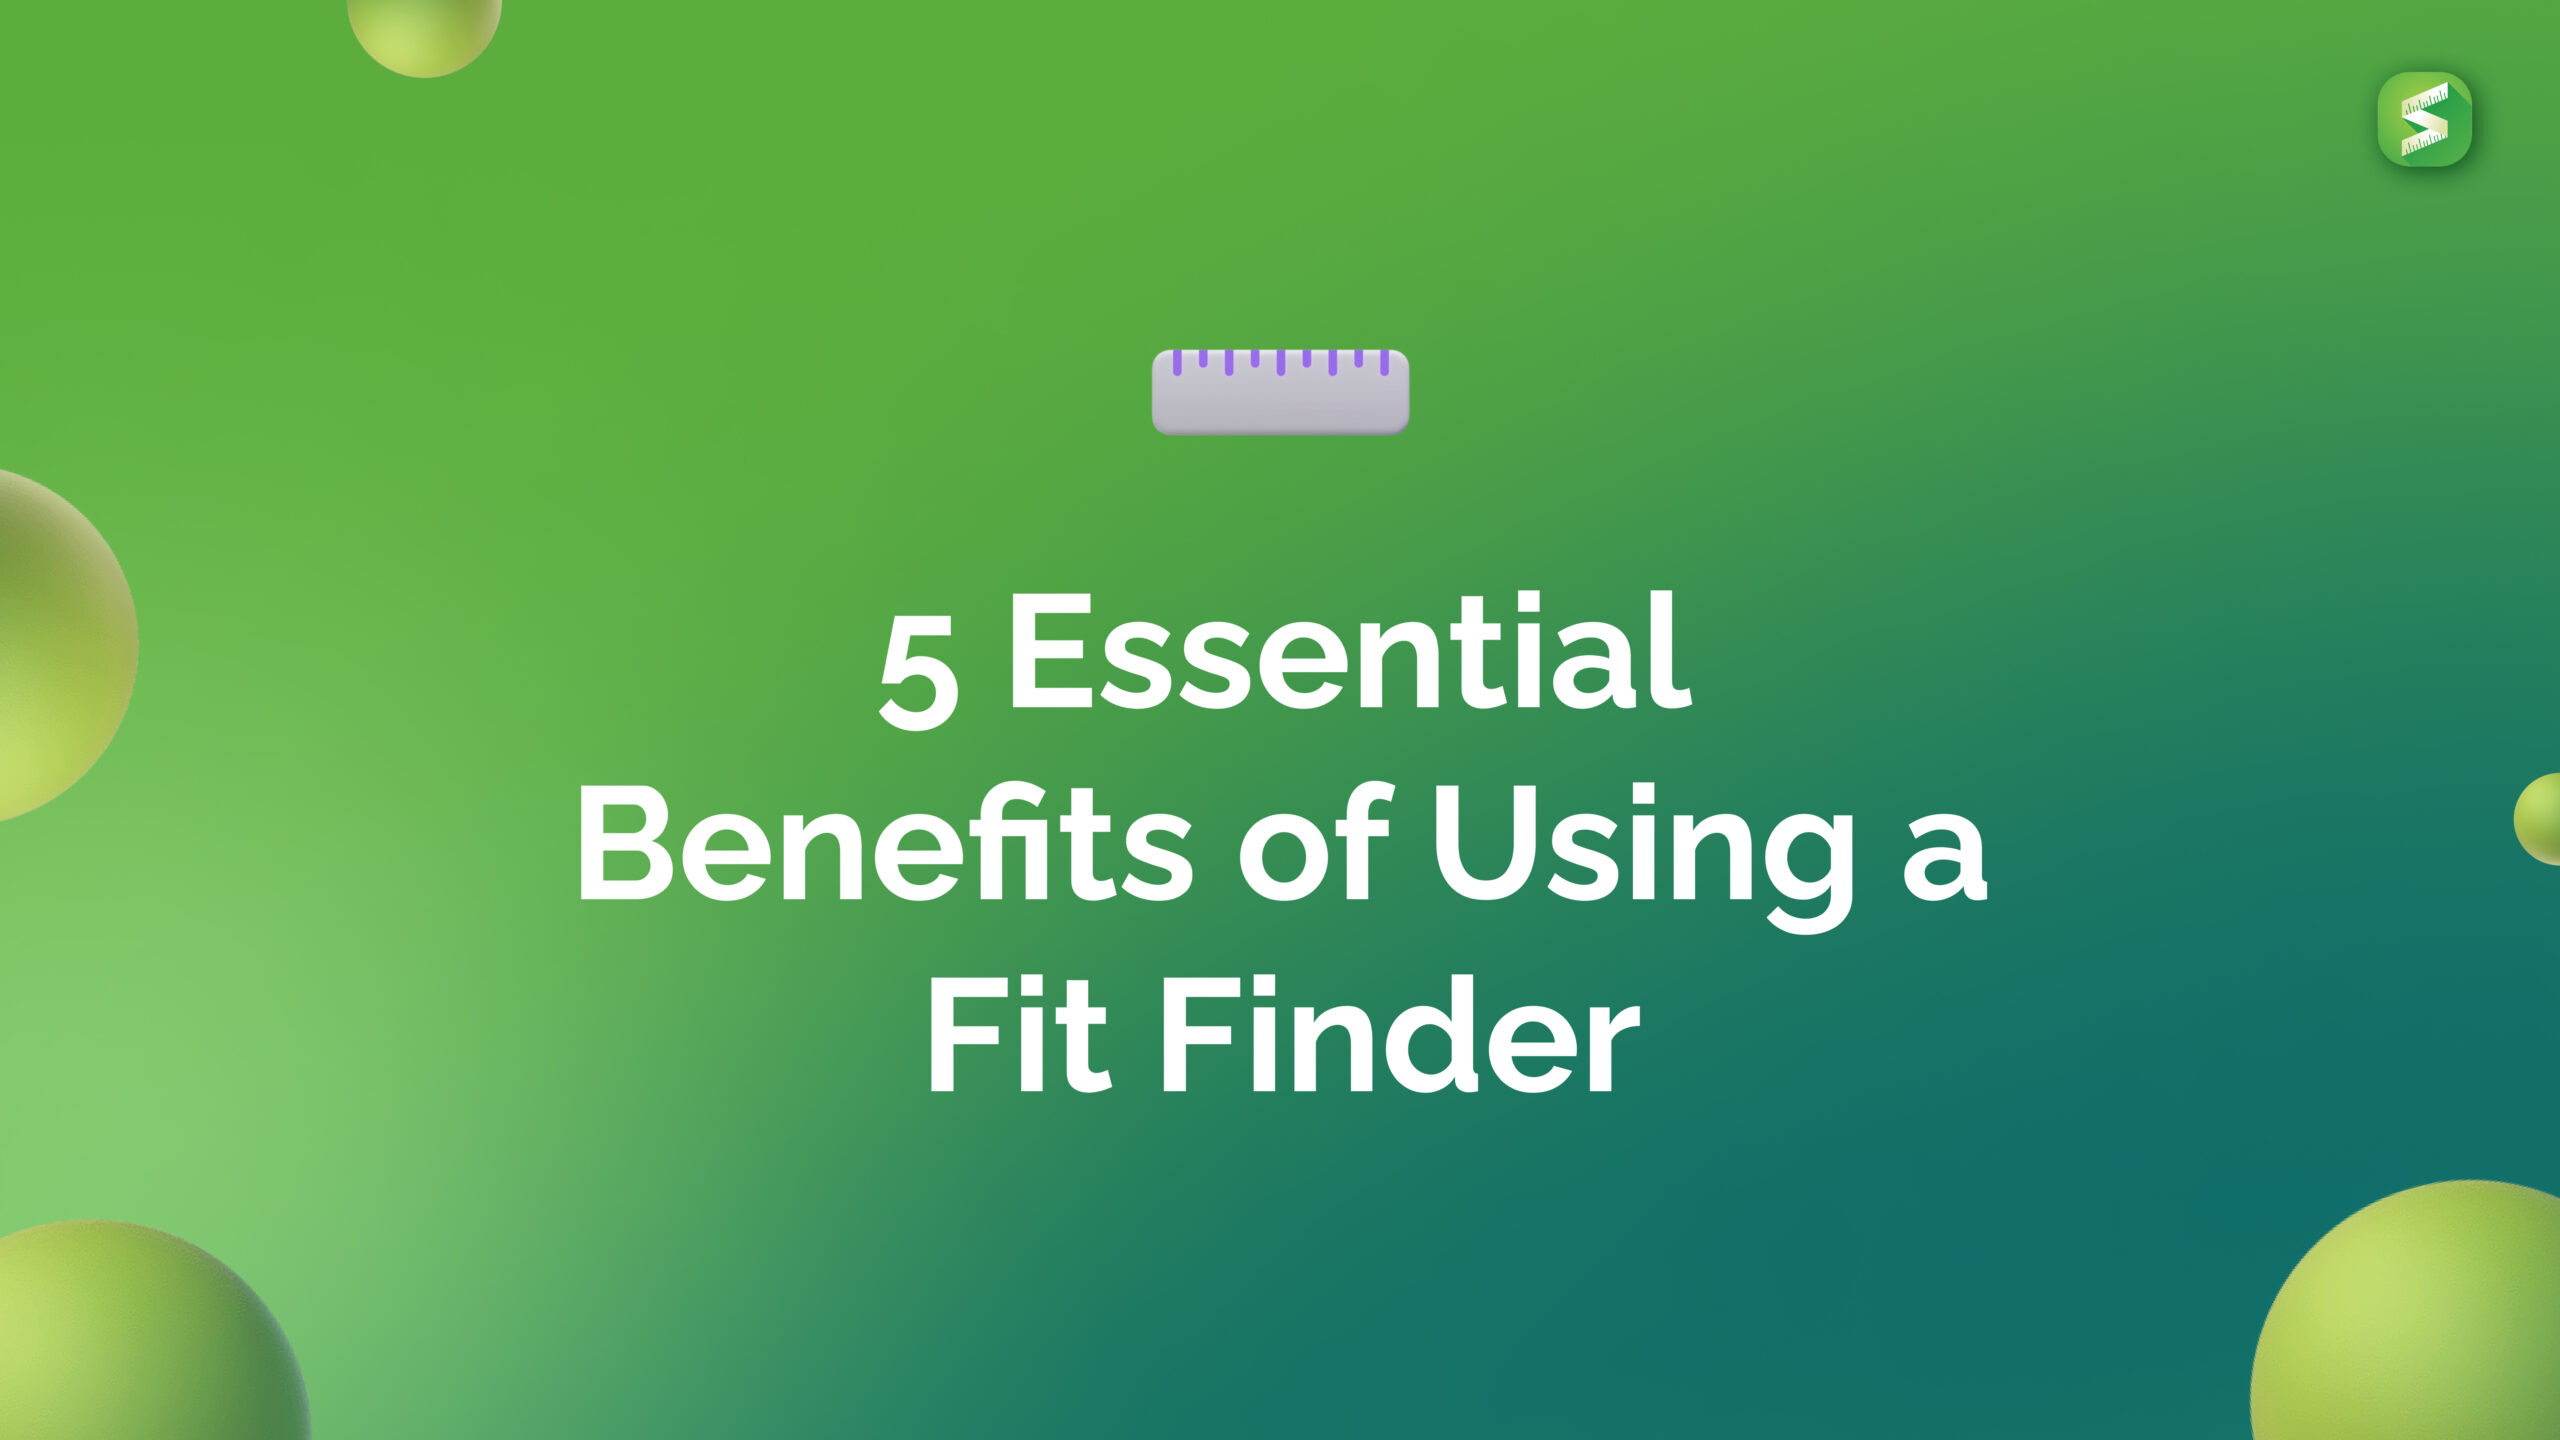 5 Essential Benefits of Using a Fit Finder for Your E-commerce Business